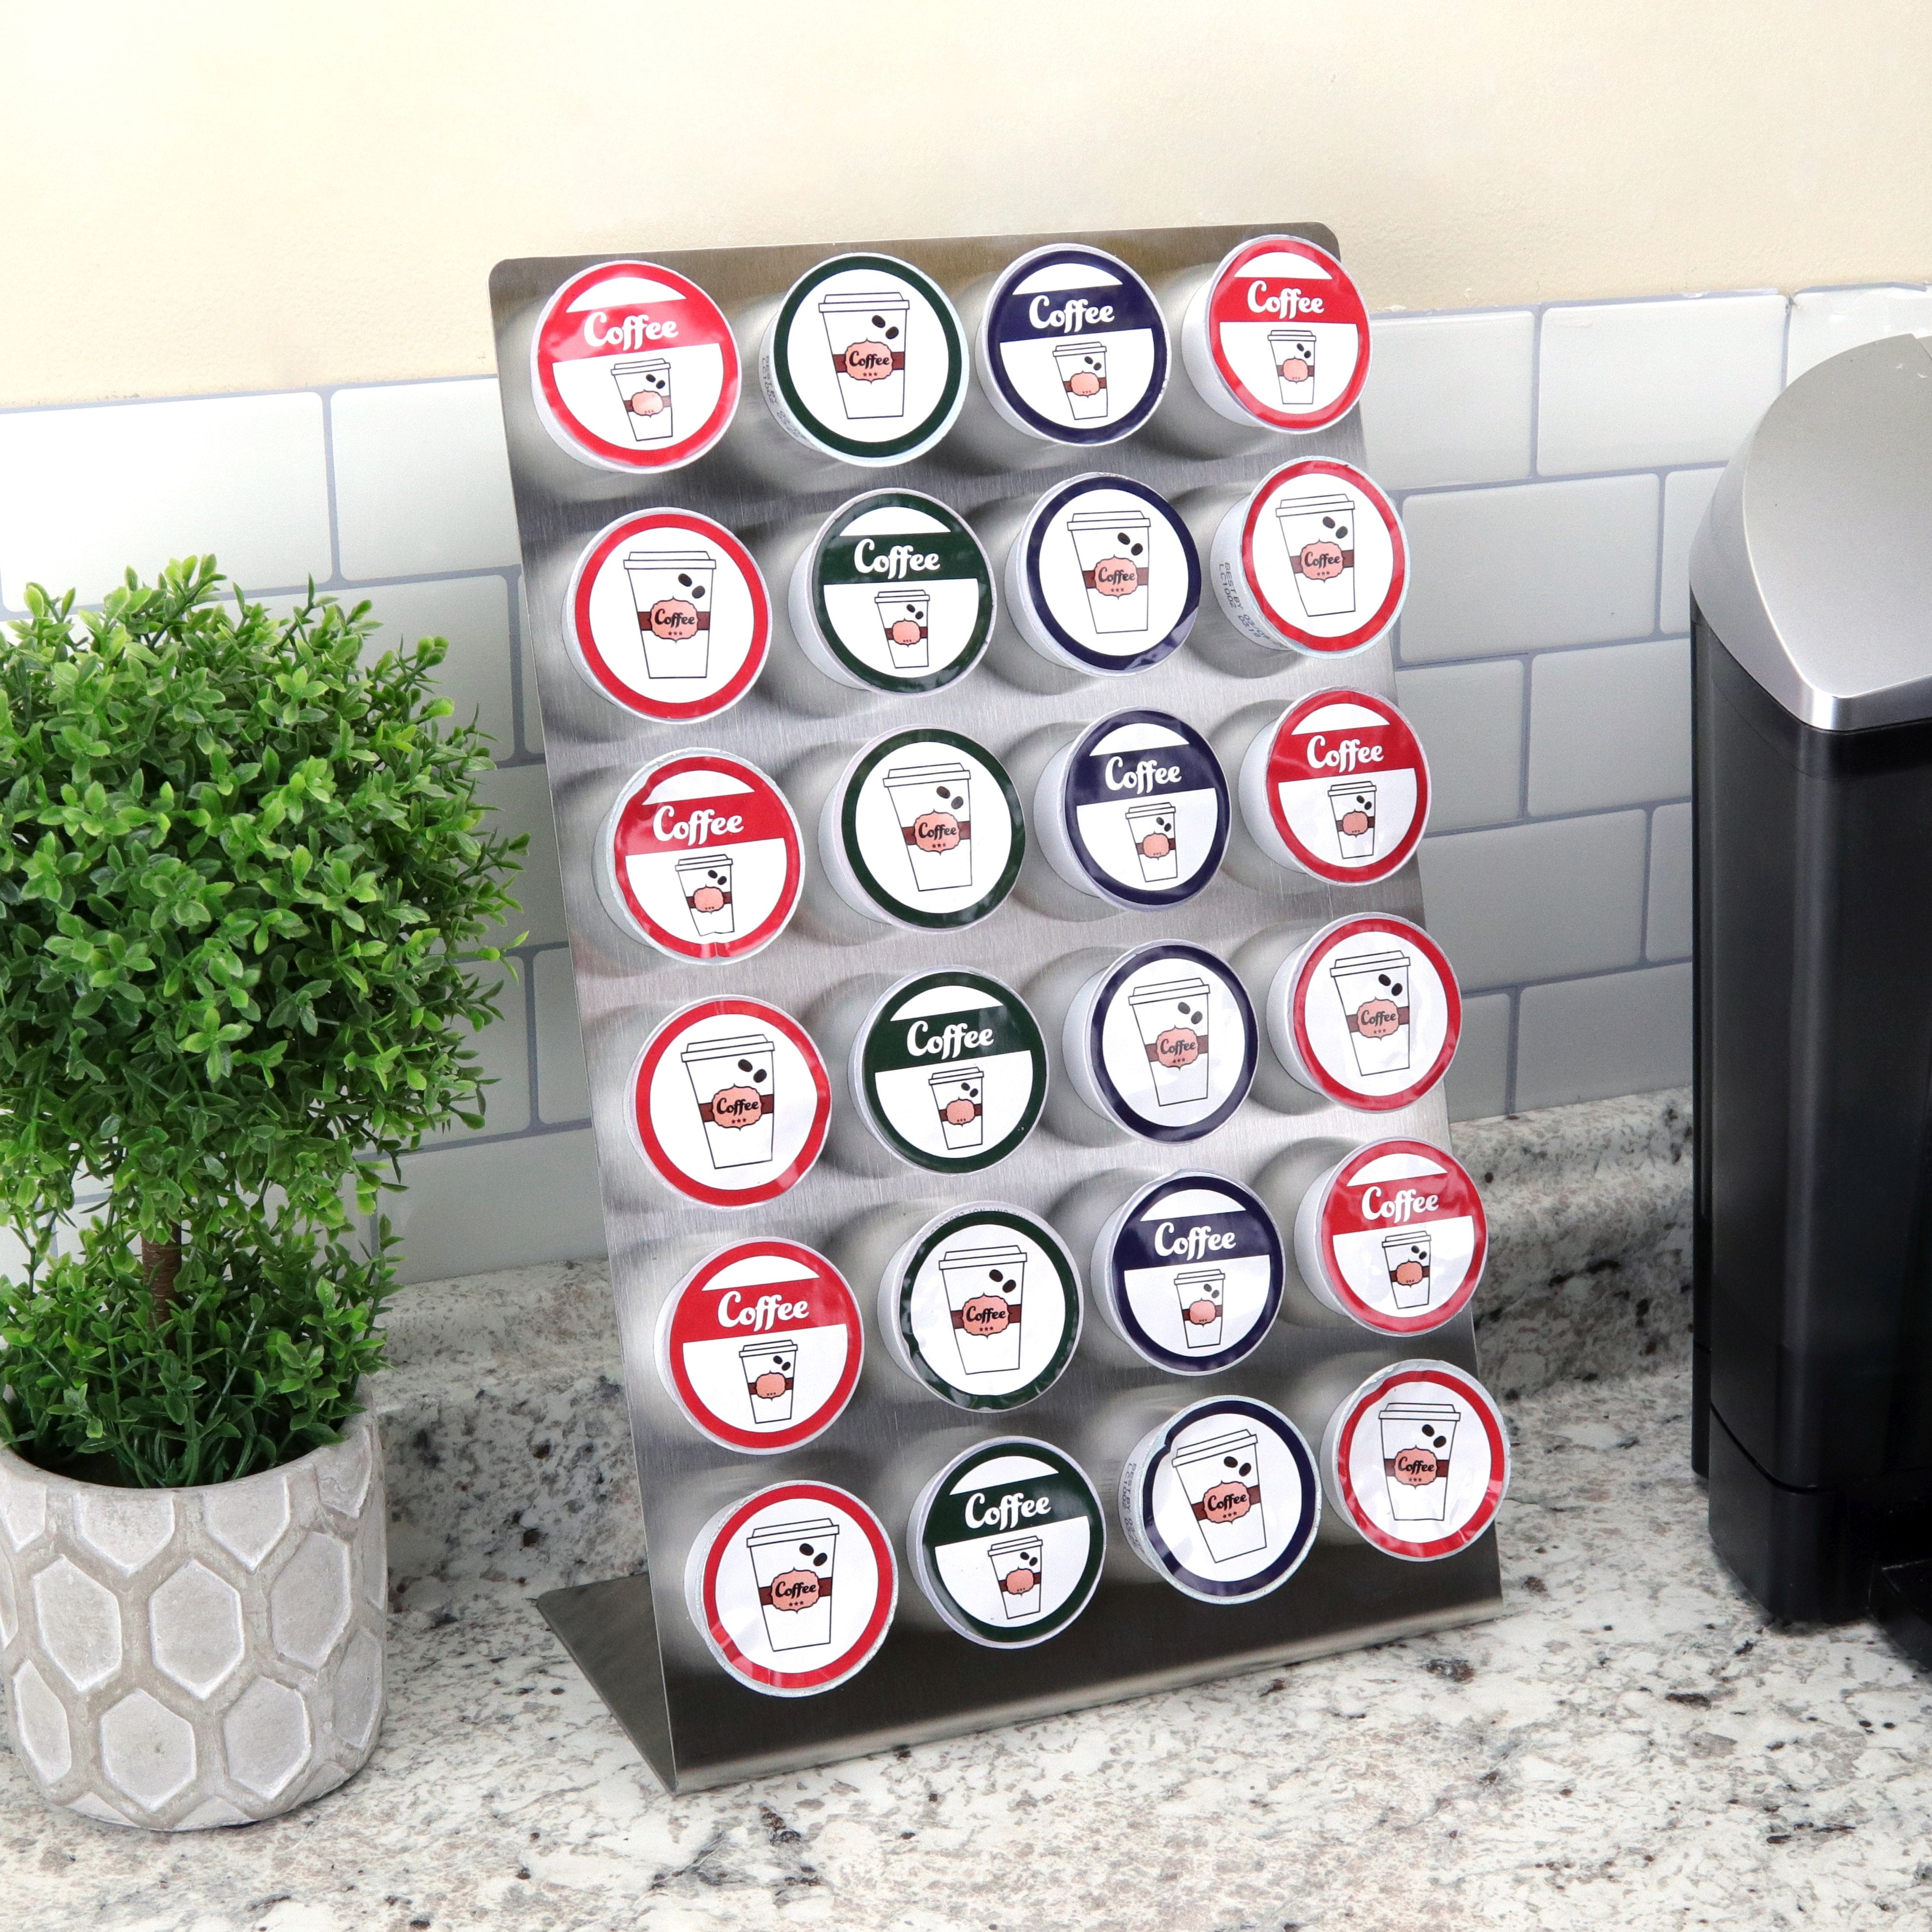 Coffee Pod Brushed Stainless Steel Organizer Stand Fits Keurig K-Cup Holds 24